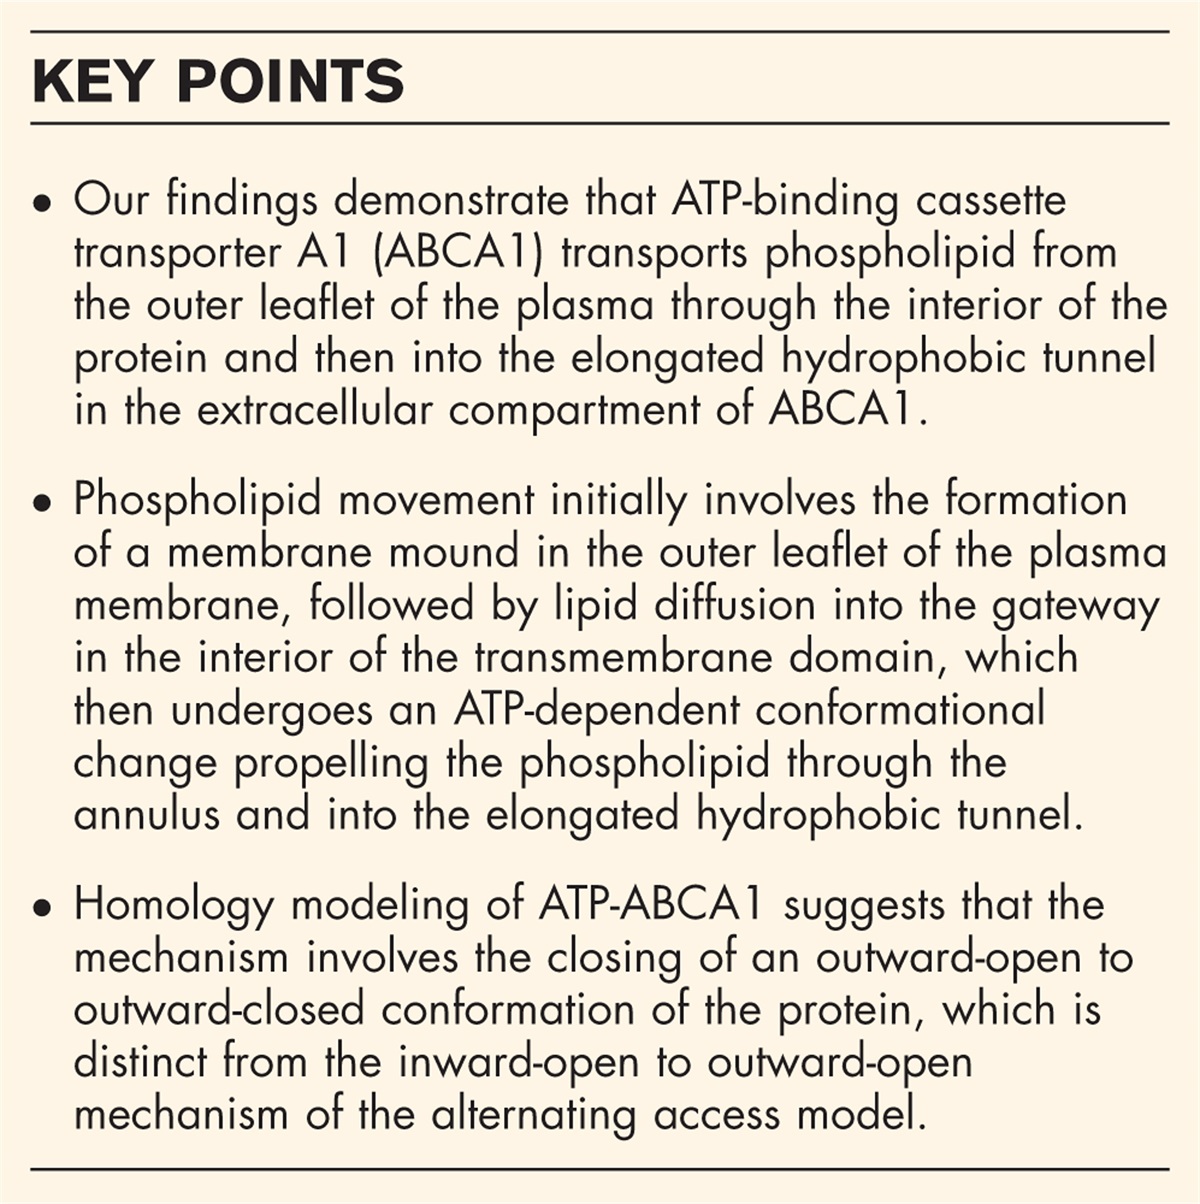 Phospholipid transport by ABCA1: the extracellular translocase or alternating access model?